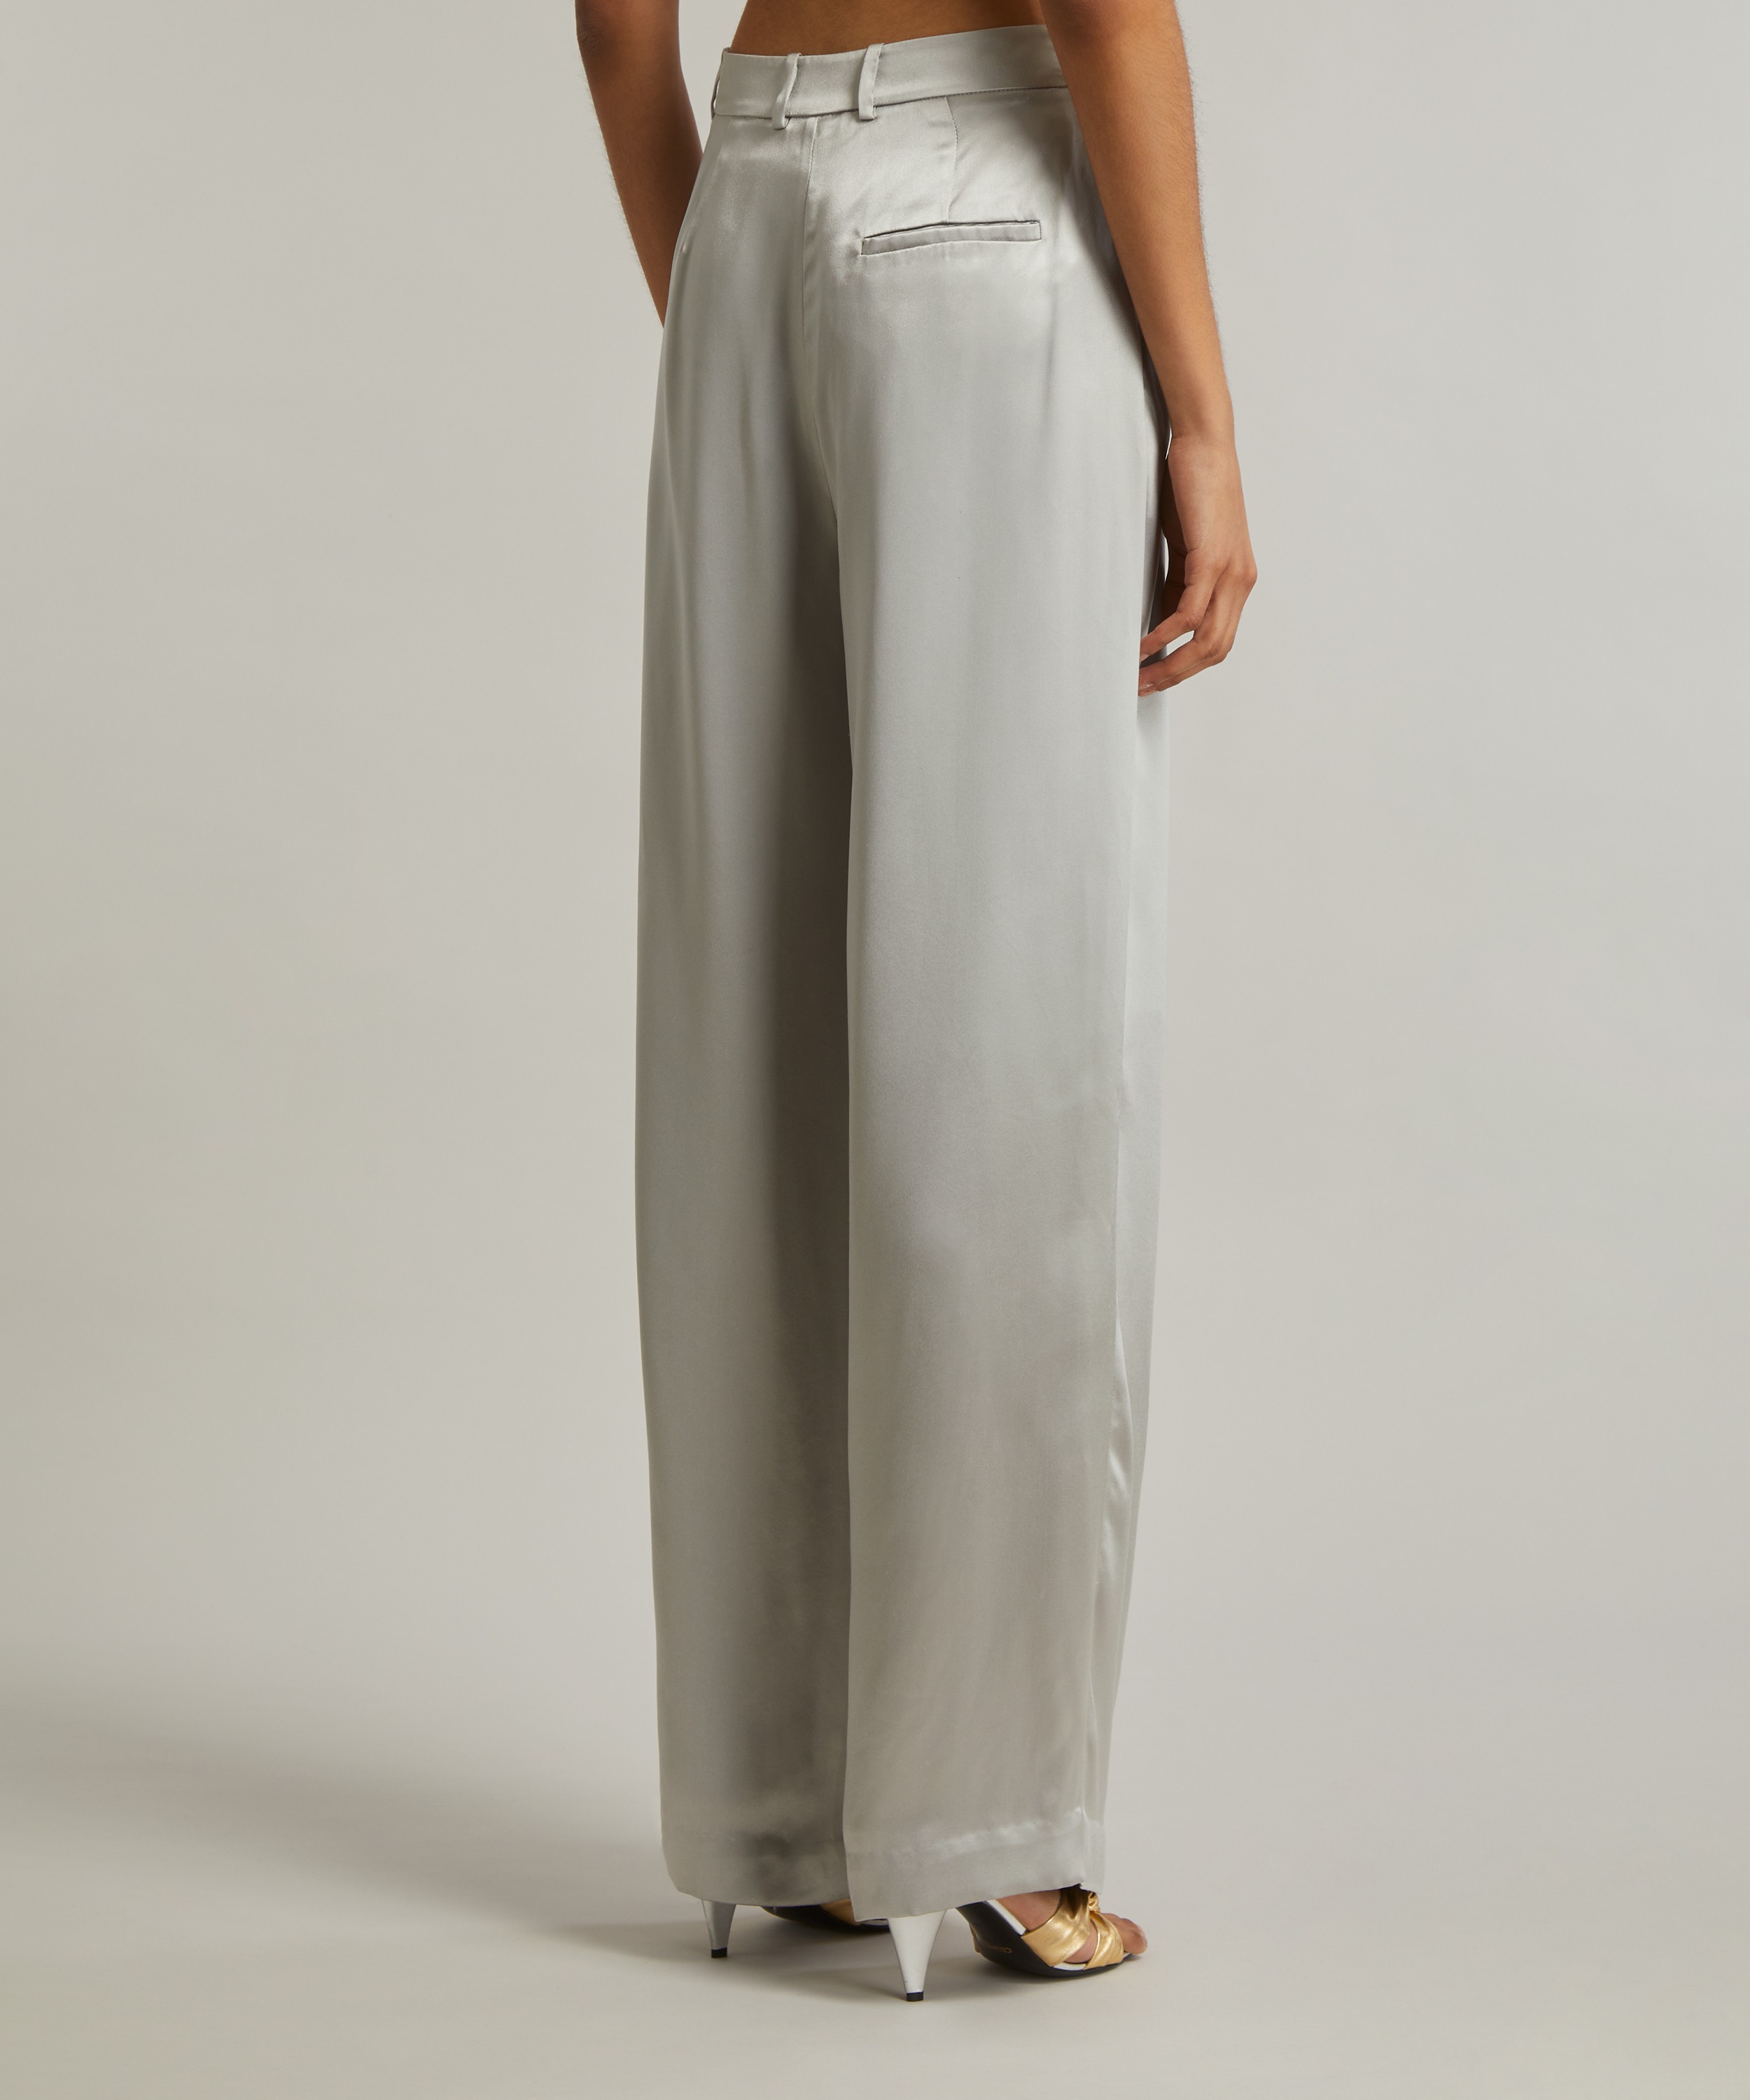 Loulou Studio - Vione Silk Blend Trousers image number 3